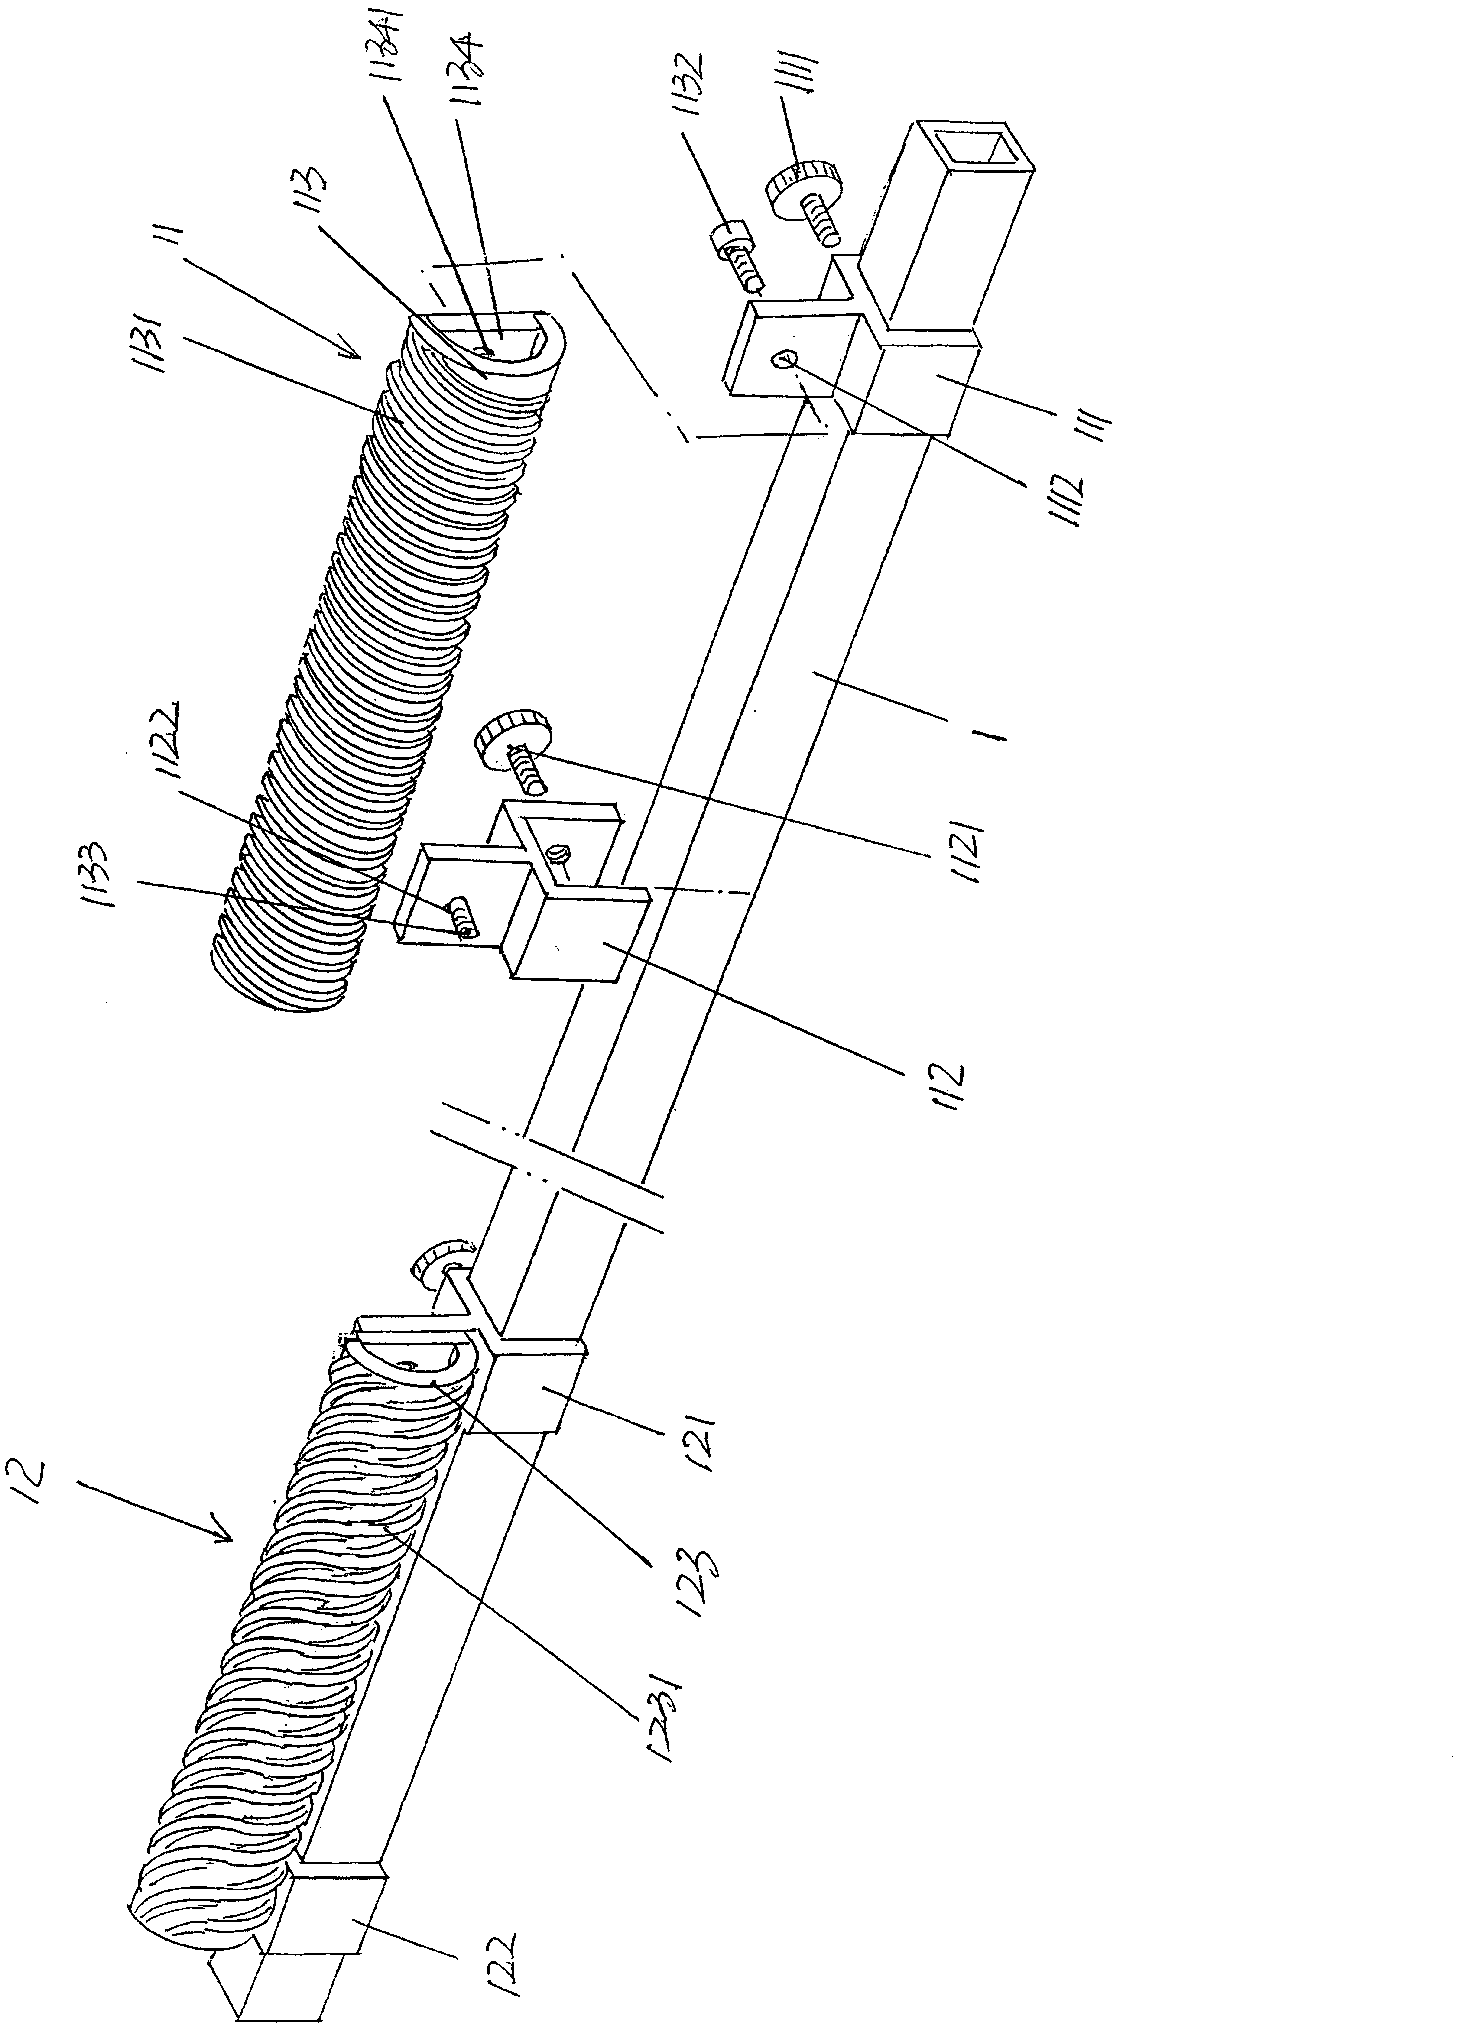 Edge peeling mechanism for knitwear rolling and inspecting machine